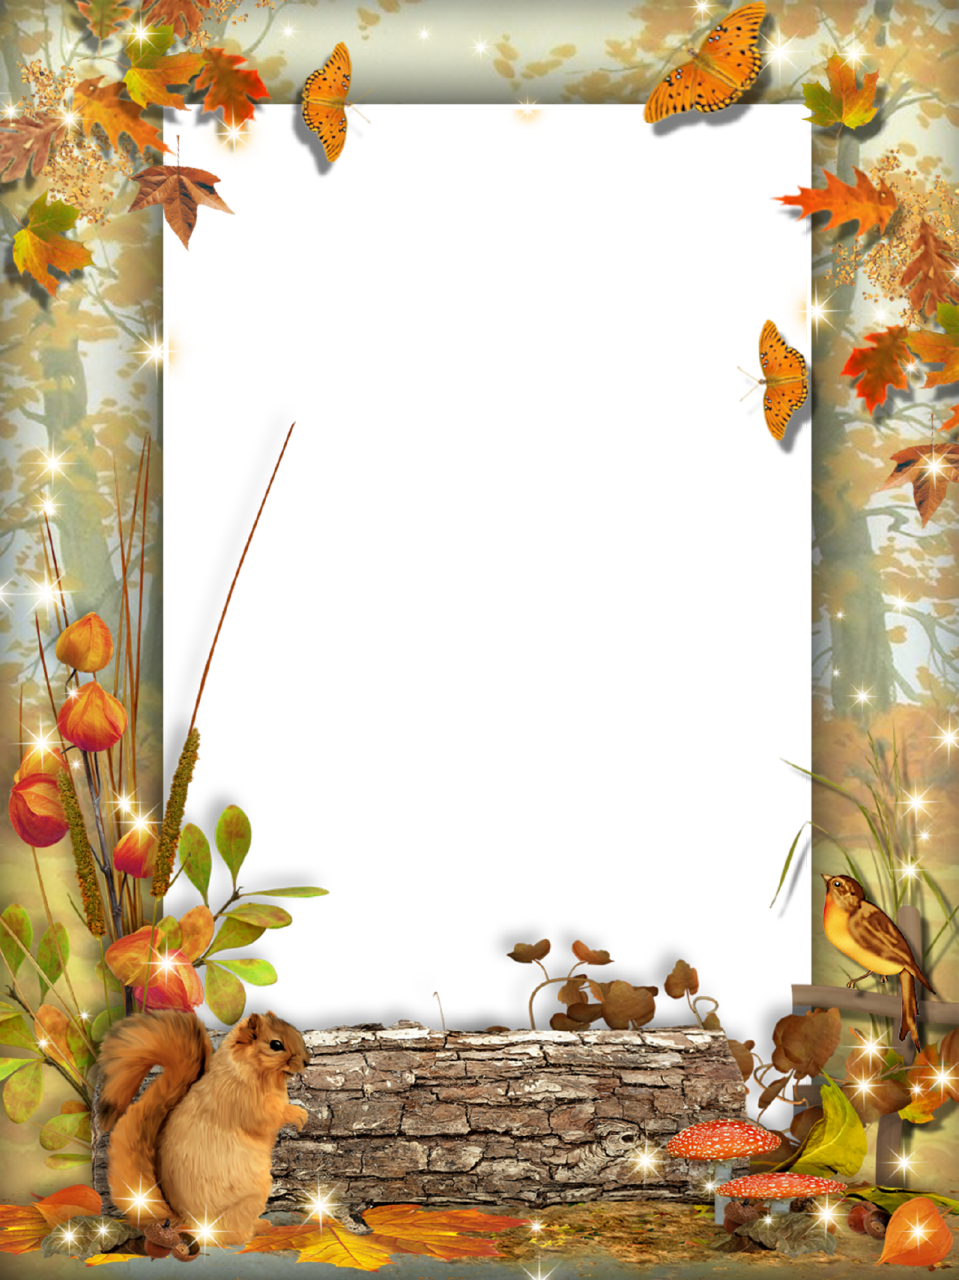 Fall frame png. Autumn photo squirrel in